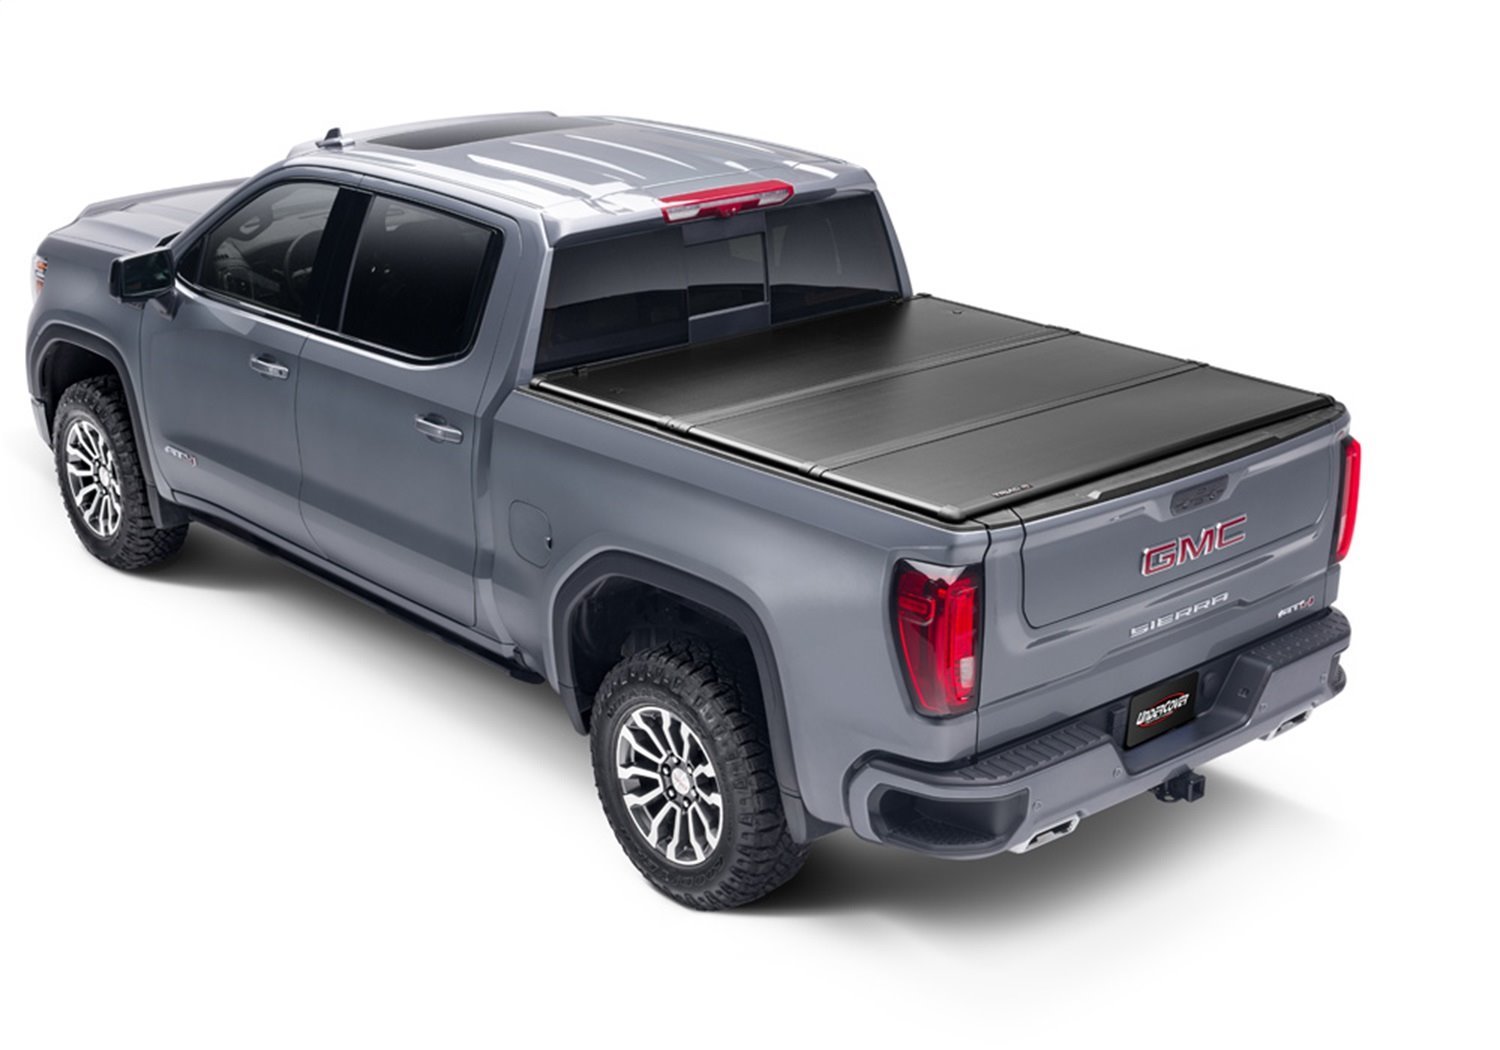 TR46015 Triad Hard Folding Cover, Fits Select Toyota Tacoma 6'Bed